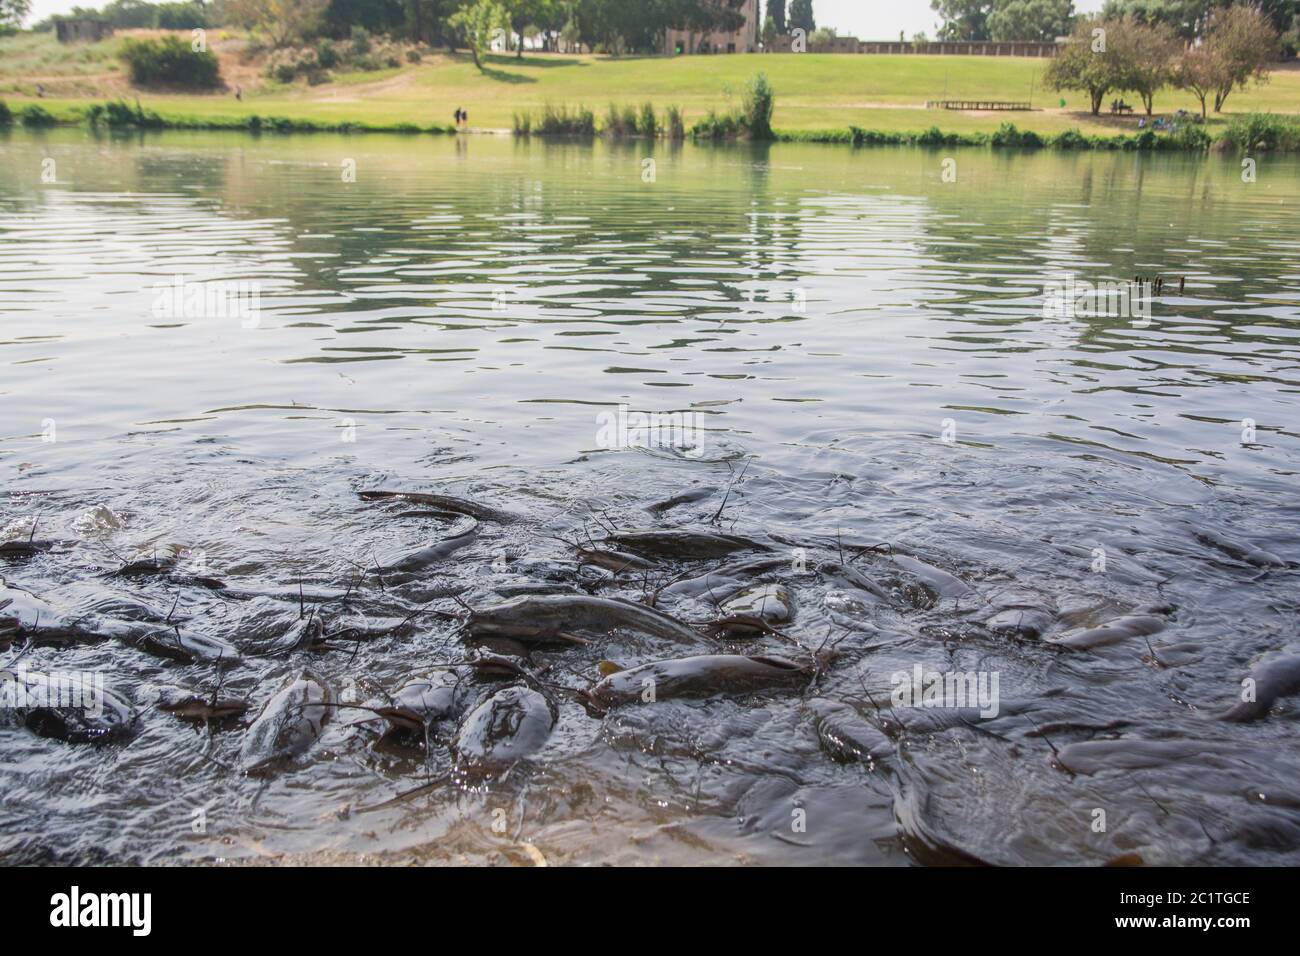 Group of African Sharptooth Catfish (Clarias gariepinus) swimming together in a park's lake Stock Photo